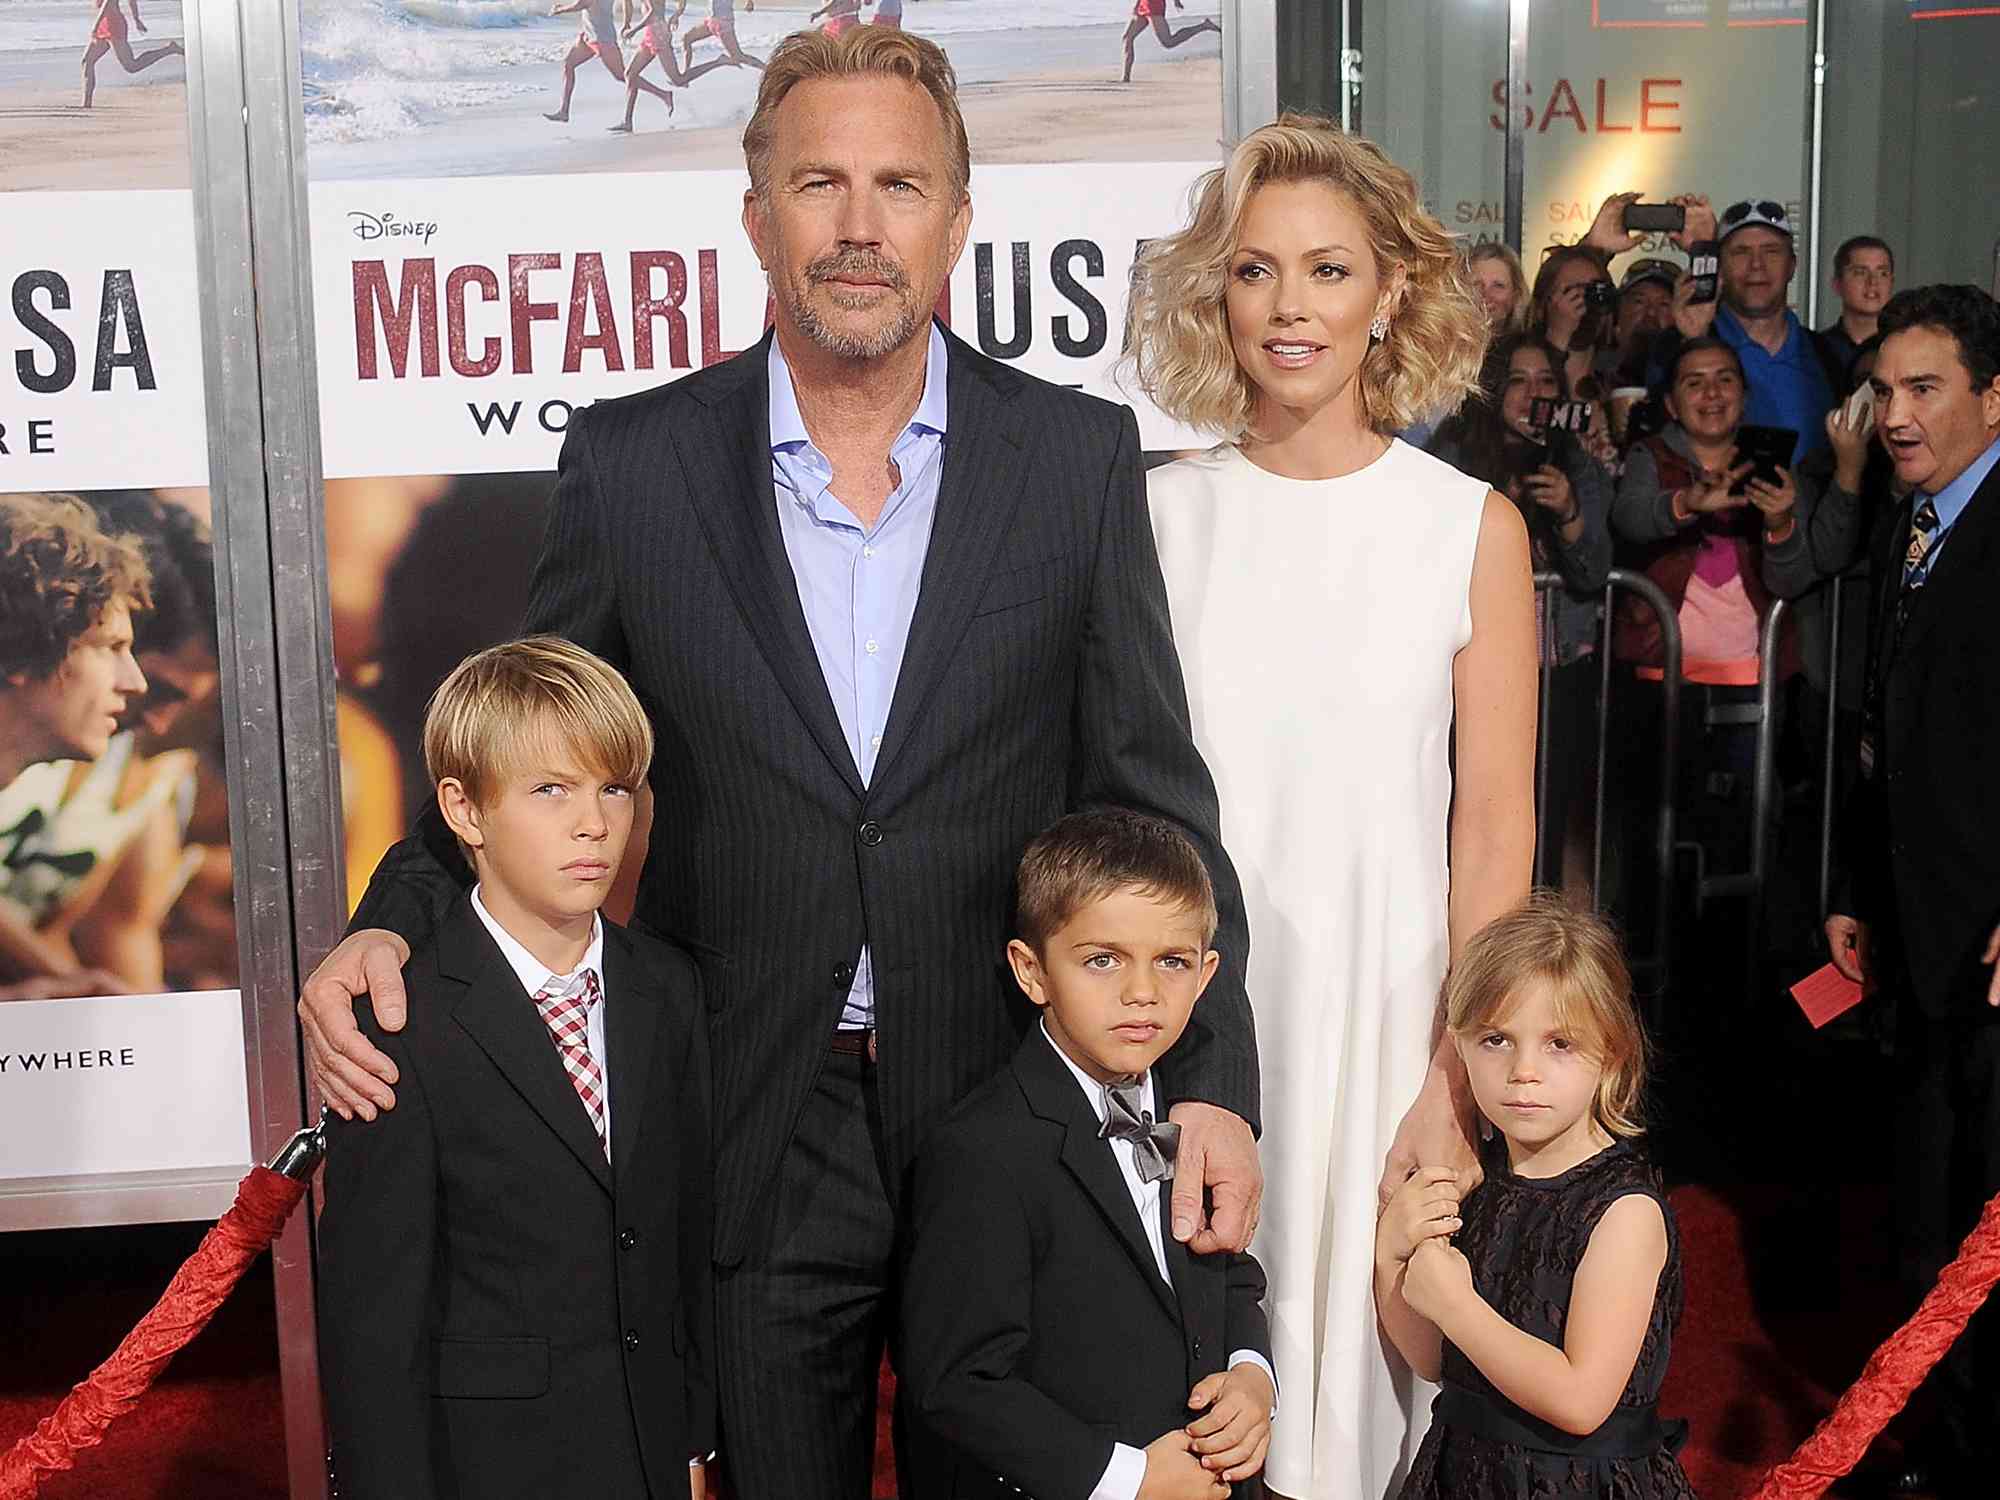 Kevin Costner, wife Christine Baumgartner and children Grace Avery Costner, Hayes Logan Costner and Cayden Wyatt Costner arrive at the World Premiere of Disney's "McFarland, USA" at the El Capitan Theatre on February 9, 2015 in Hollywood, California